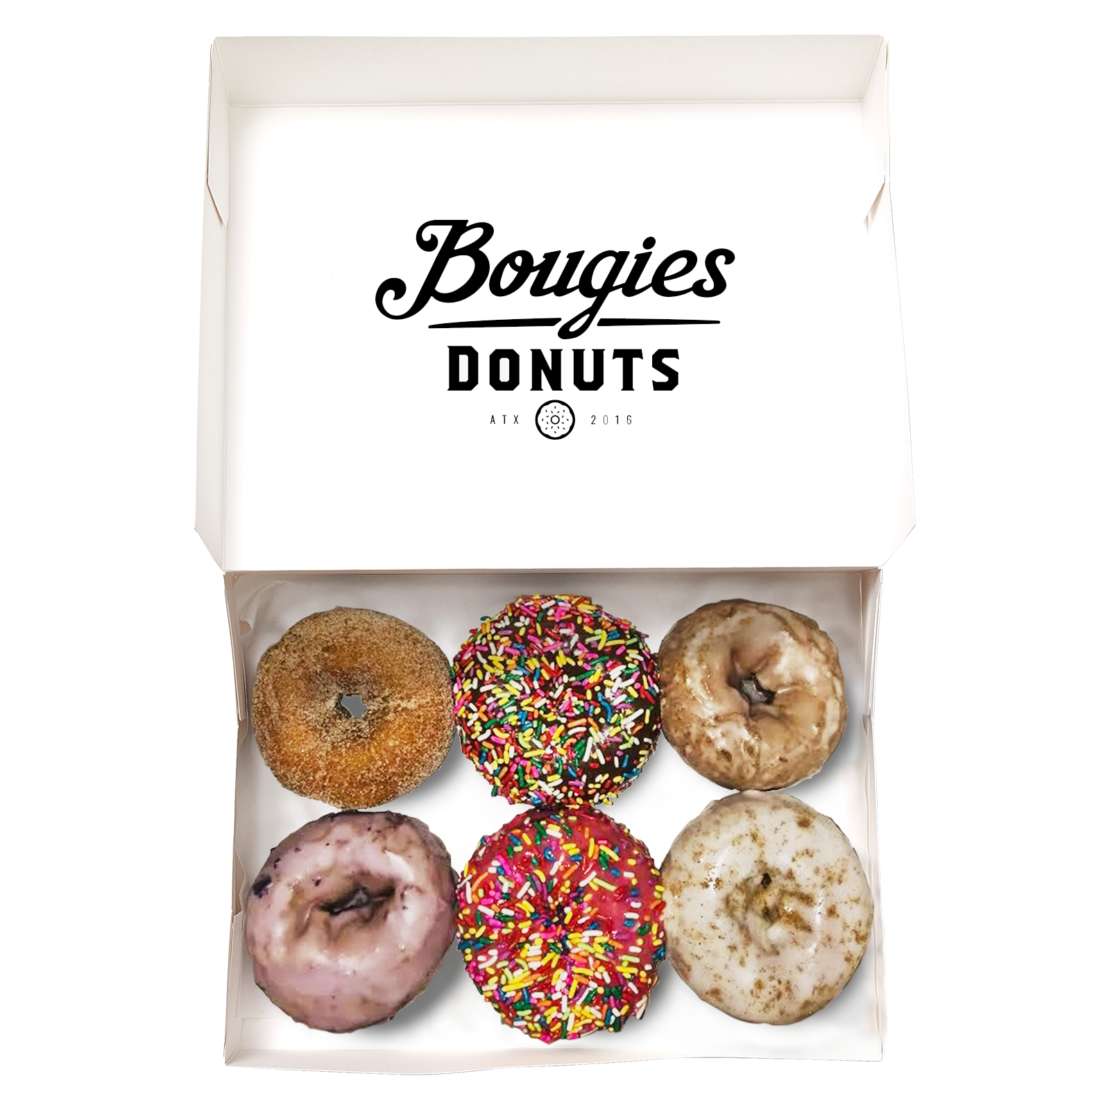 Bougie's Donuts variety pack of 6 assorted donuts